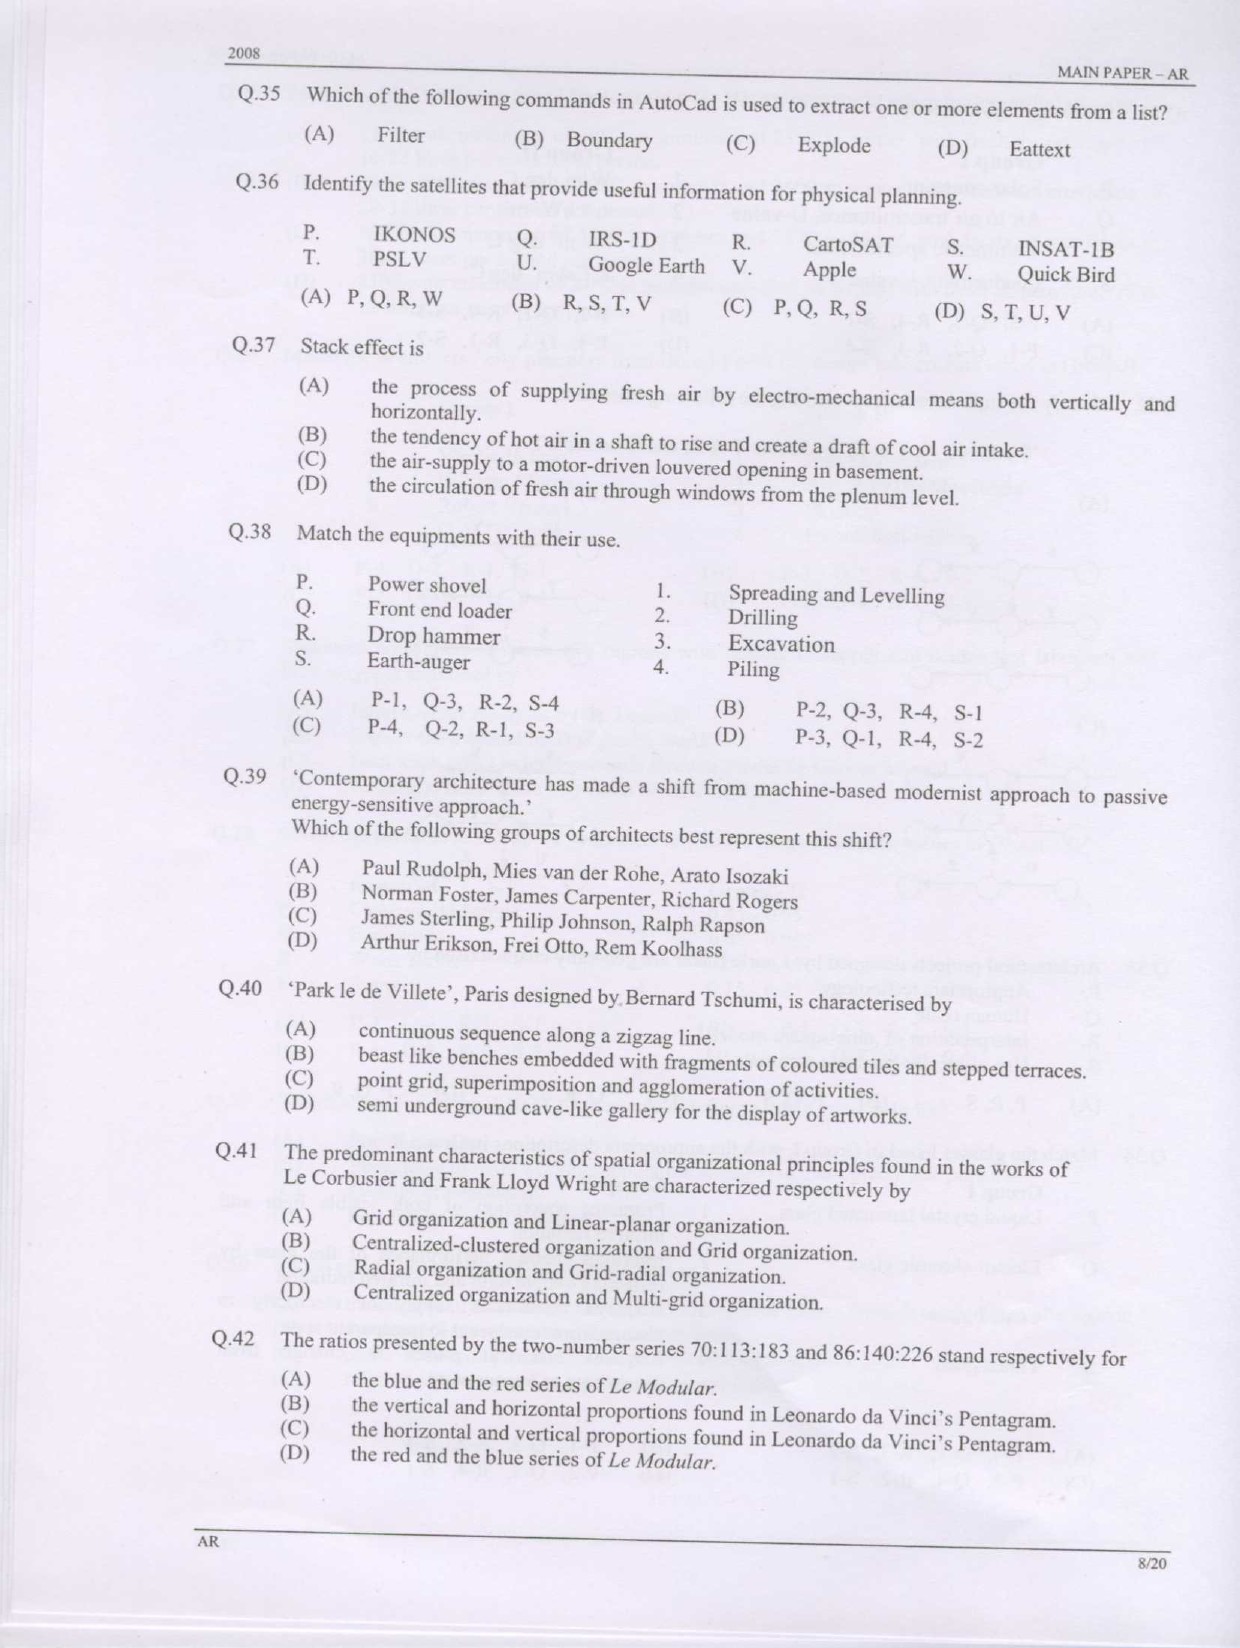 GATE Exam Question Paper 2008 Architecture and Planning 8